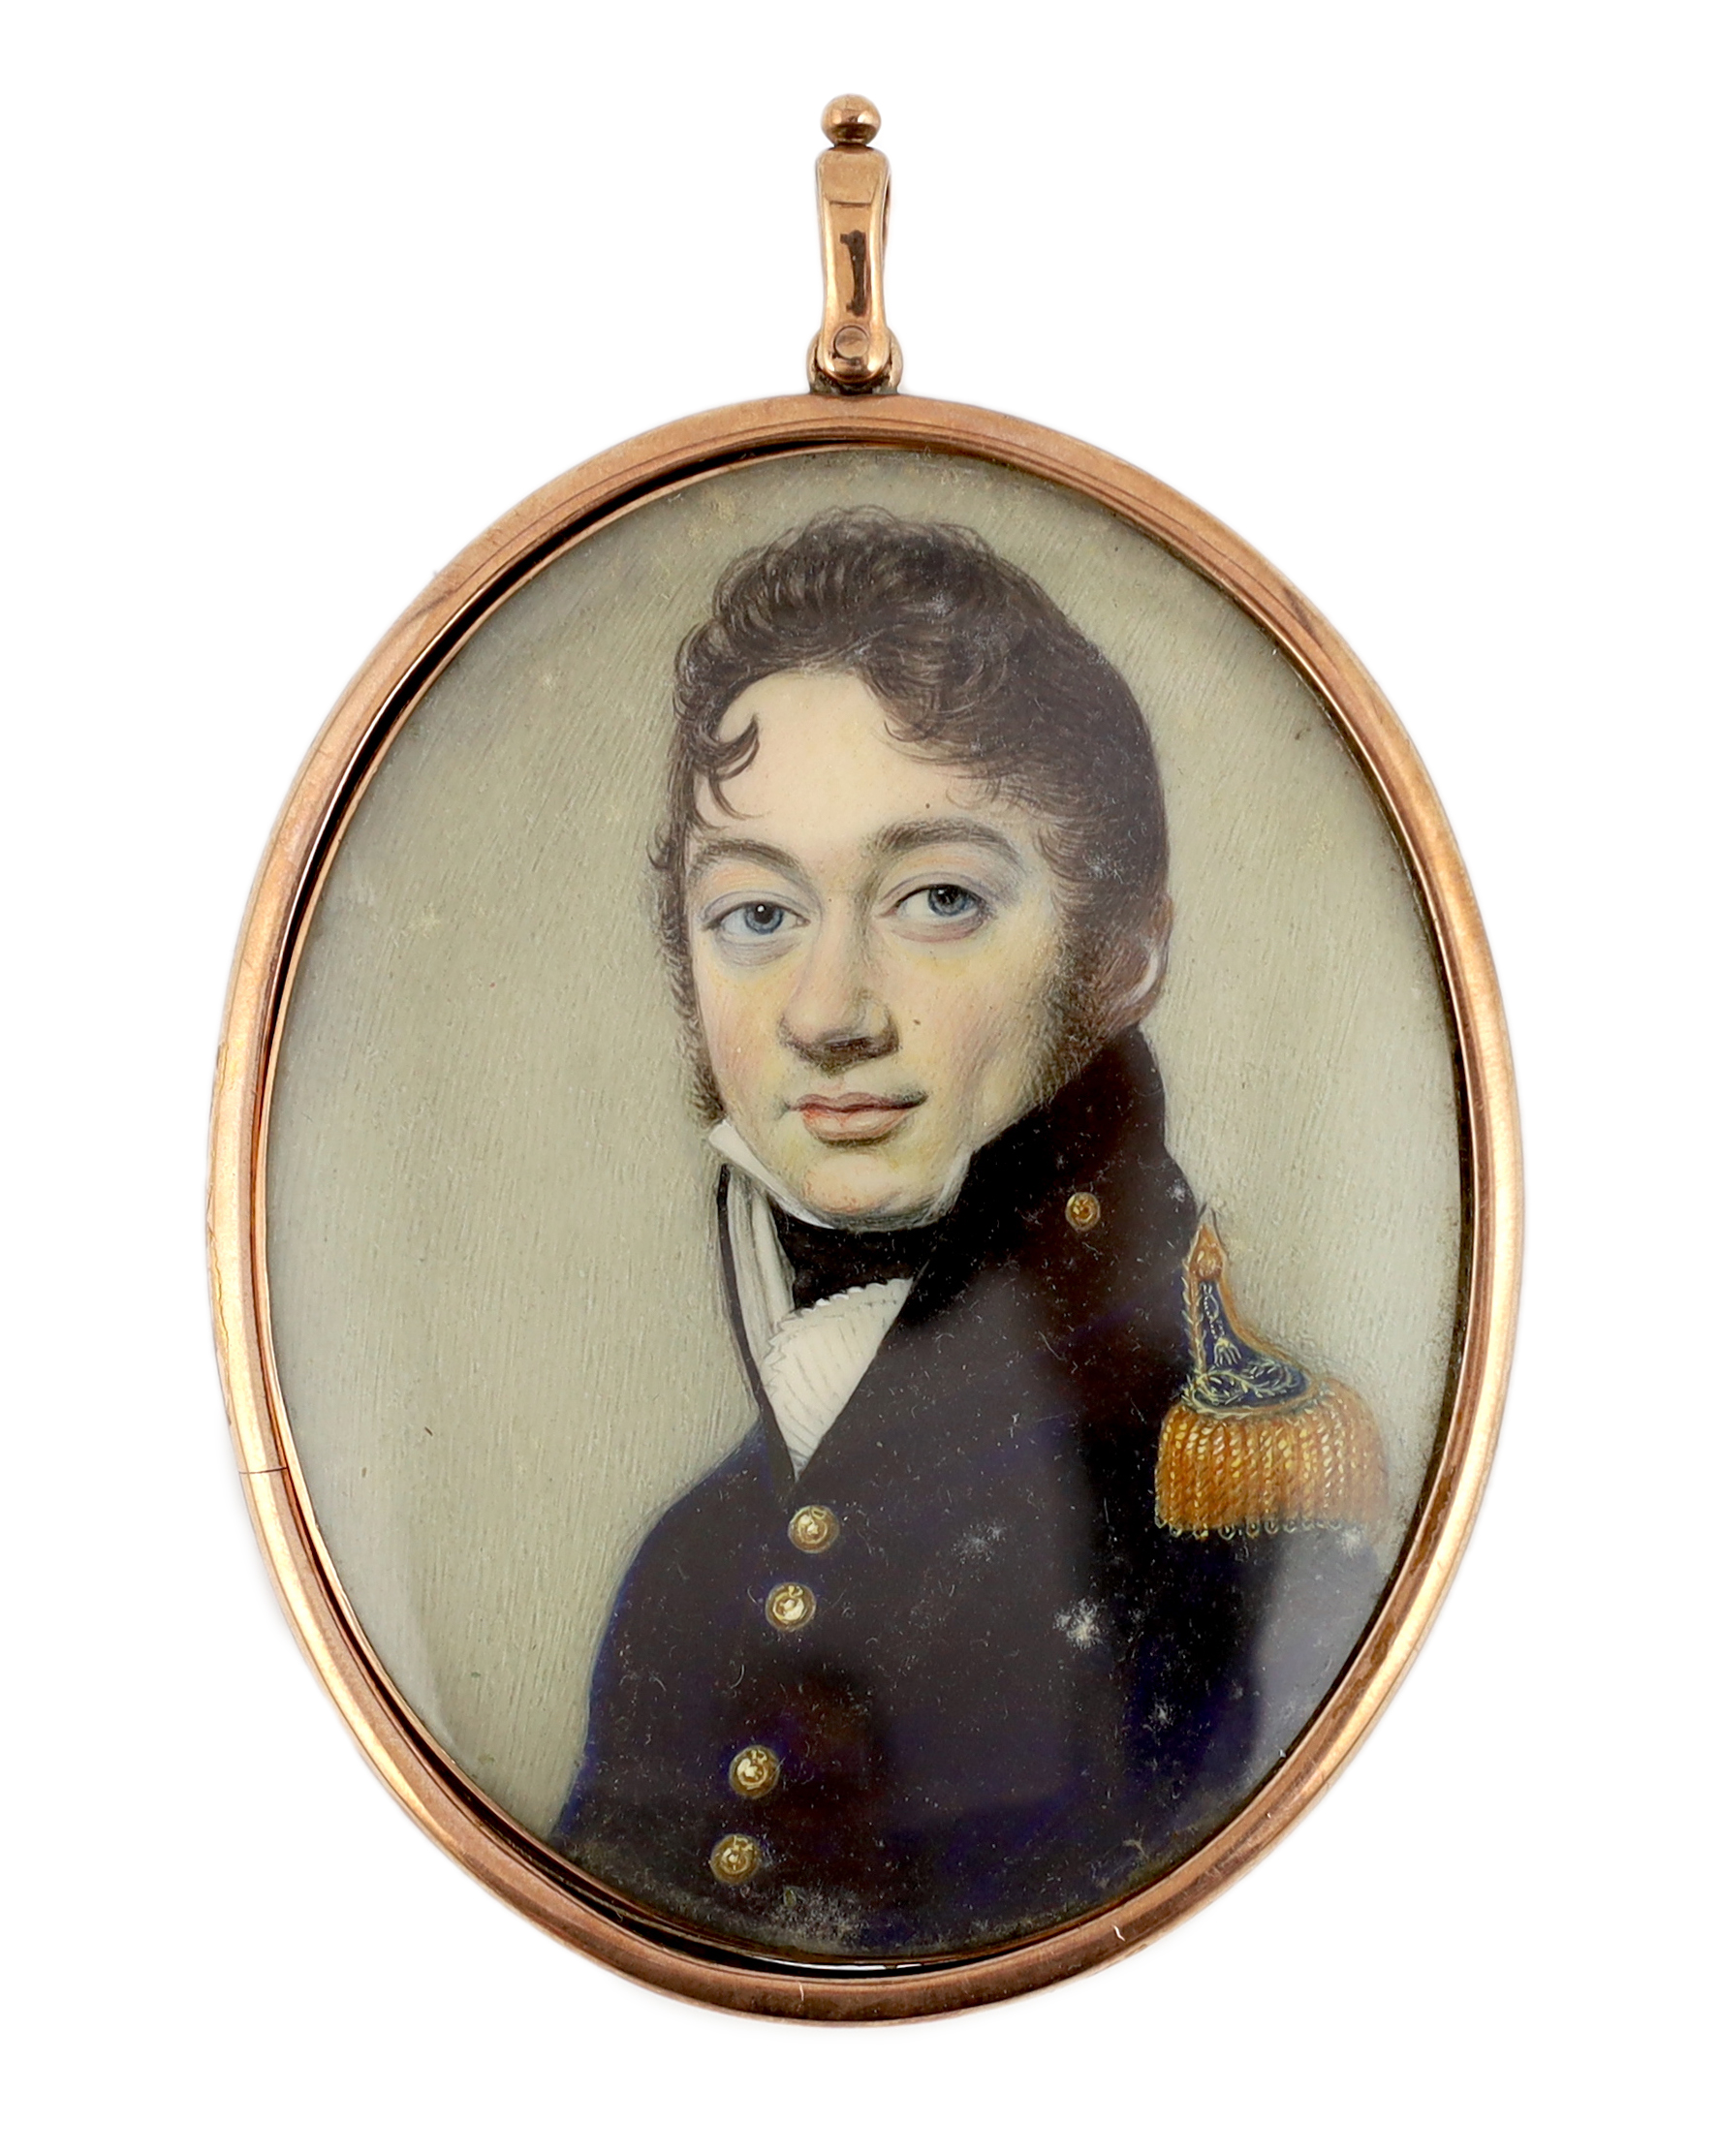 Thomas Richmond (British, 1771-1837), Portrait miniature of a naval officer, watercolour on ivory, 7.8 x 6.2cm. CITES Submission reference ZYVV72JG